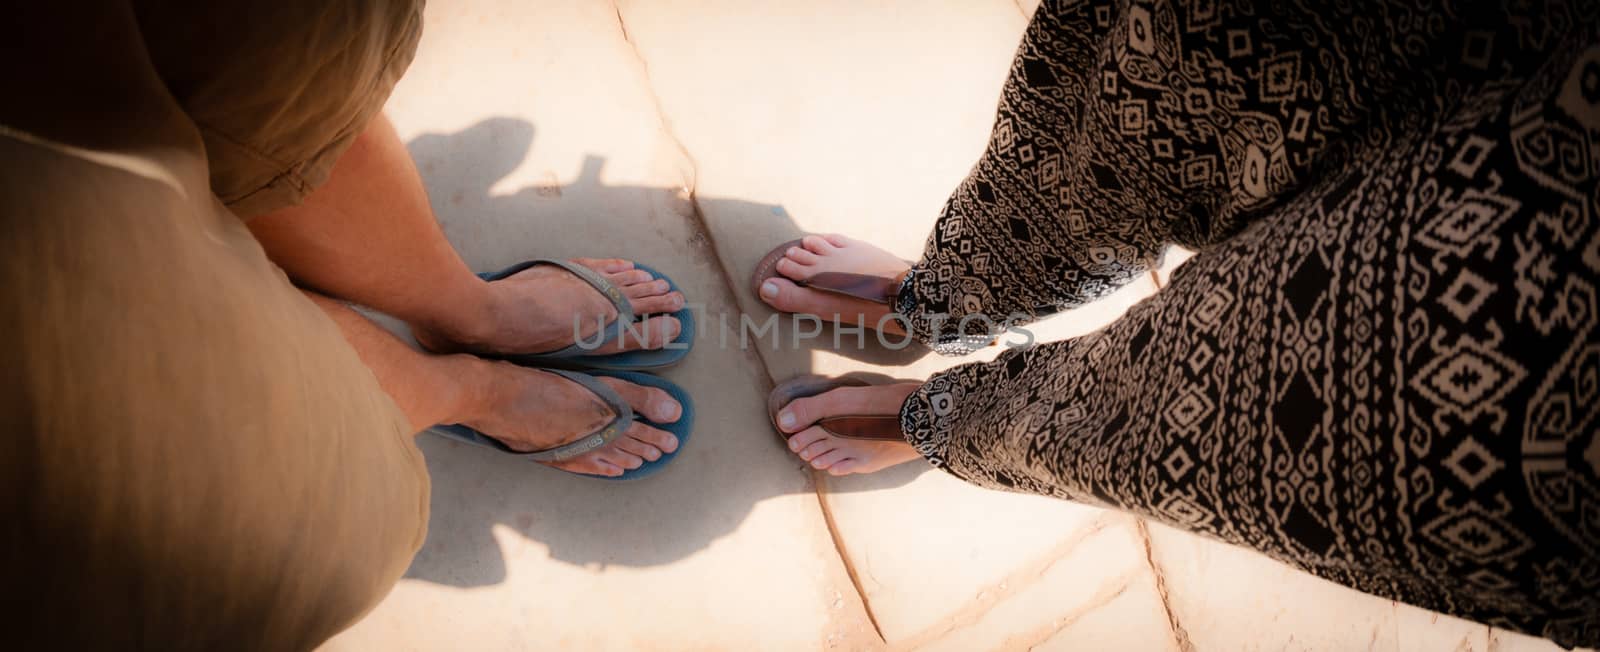 Top view of two pair dirty foot with flip flops fish-eye